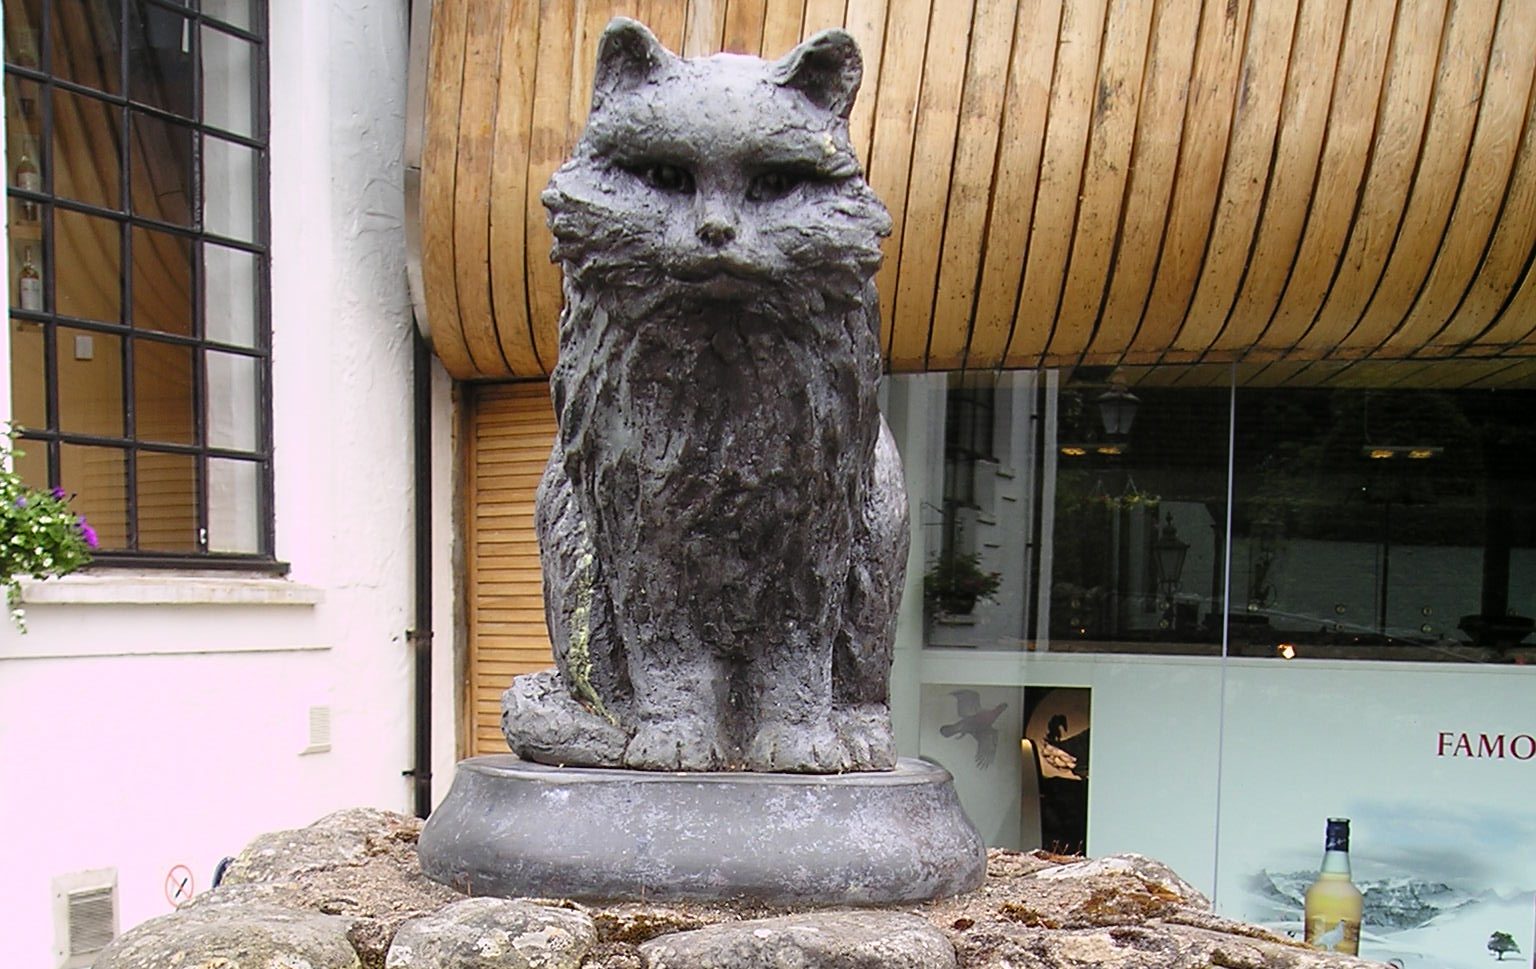 Sculpture of Towser the Famous Grouse Distillery cat